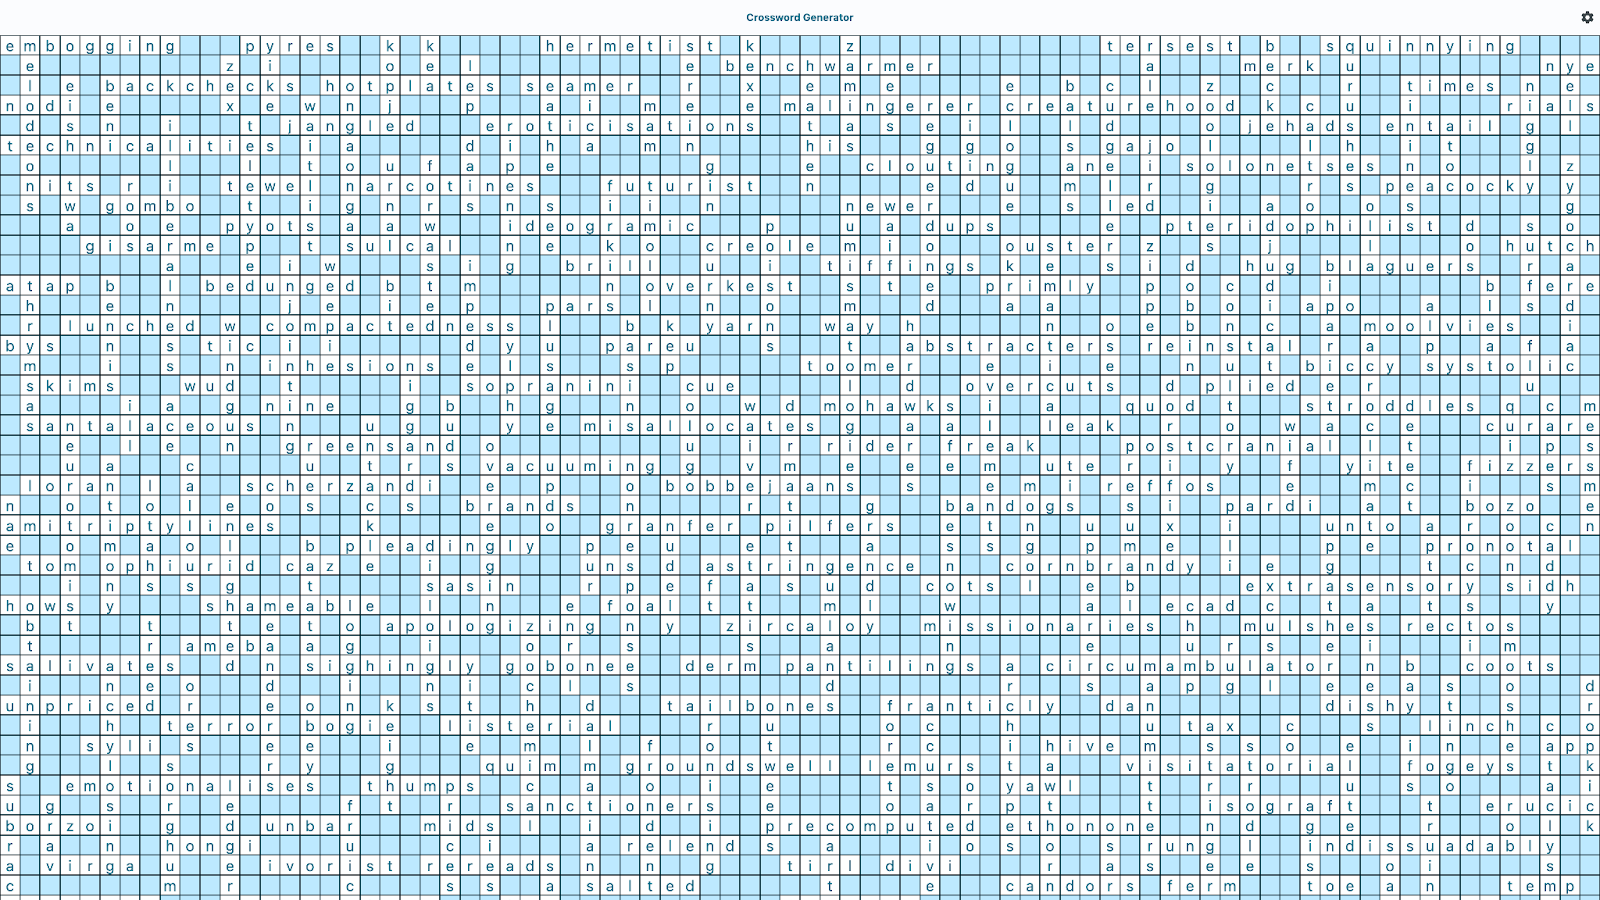 Crossword Generator, with lots of words intersecting. Zoomed out, the words are too small to read.